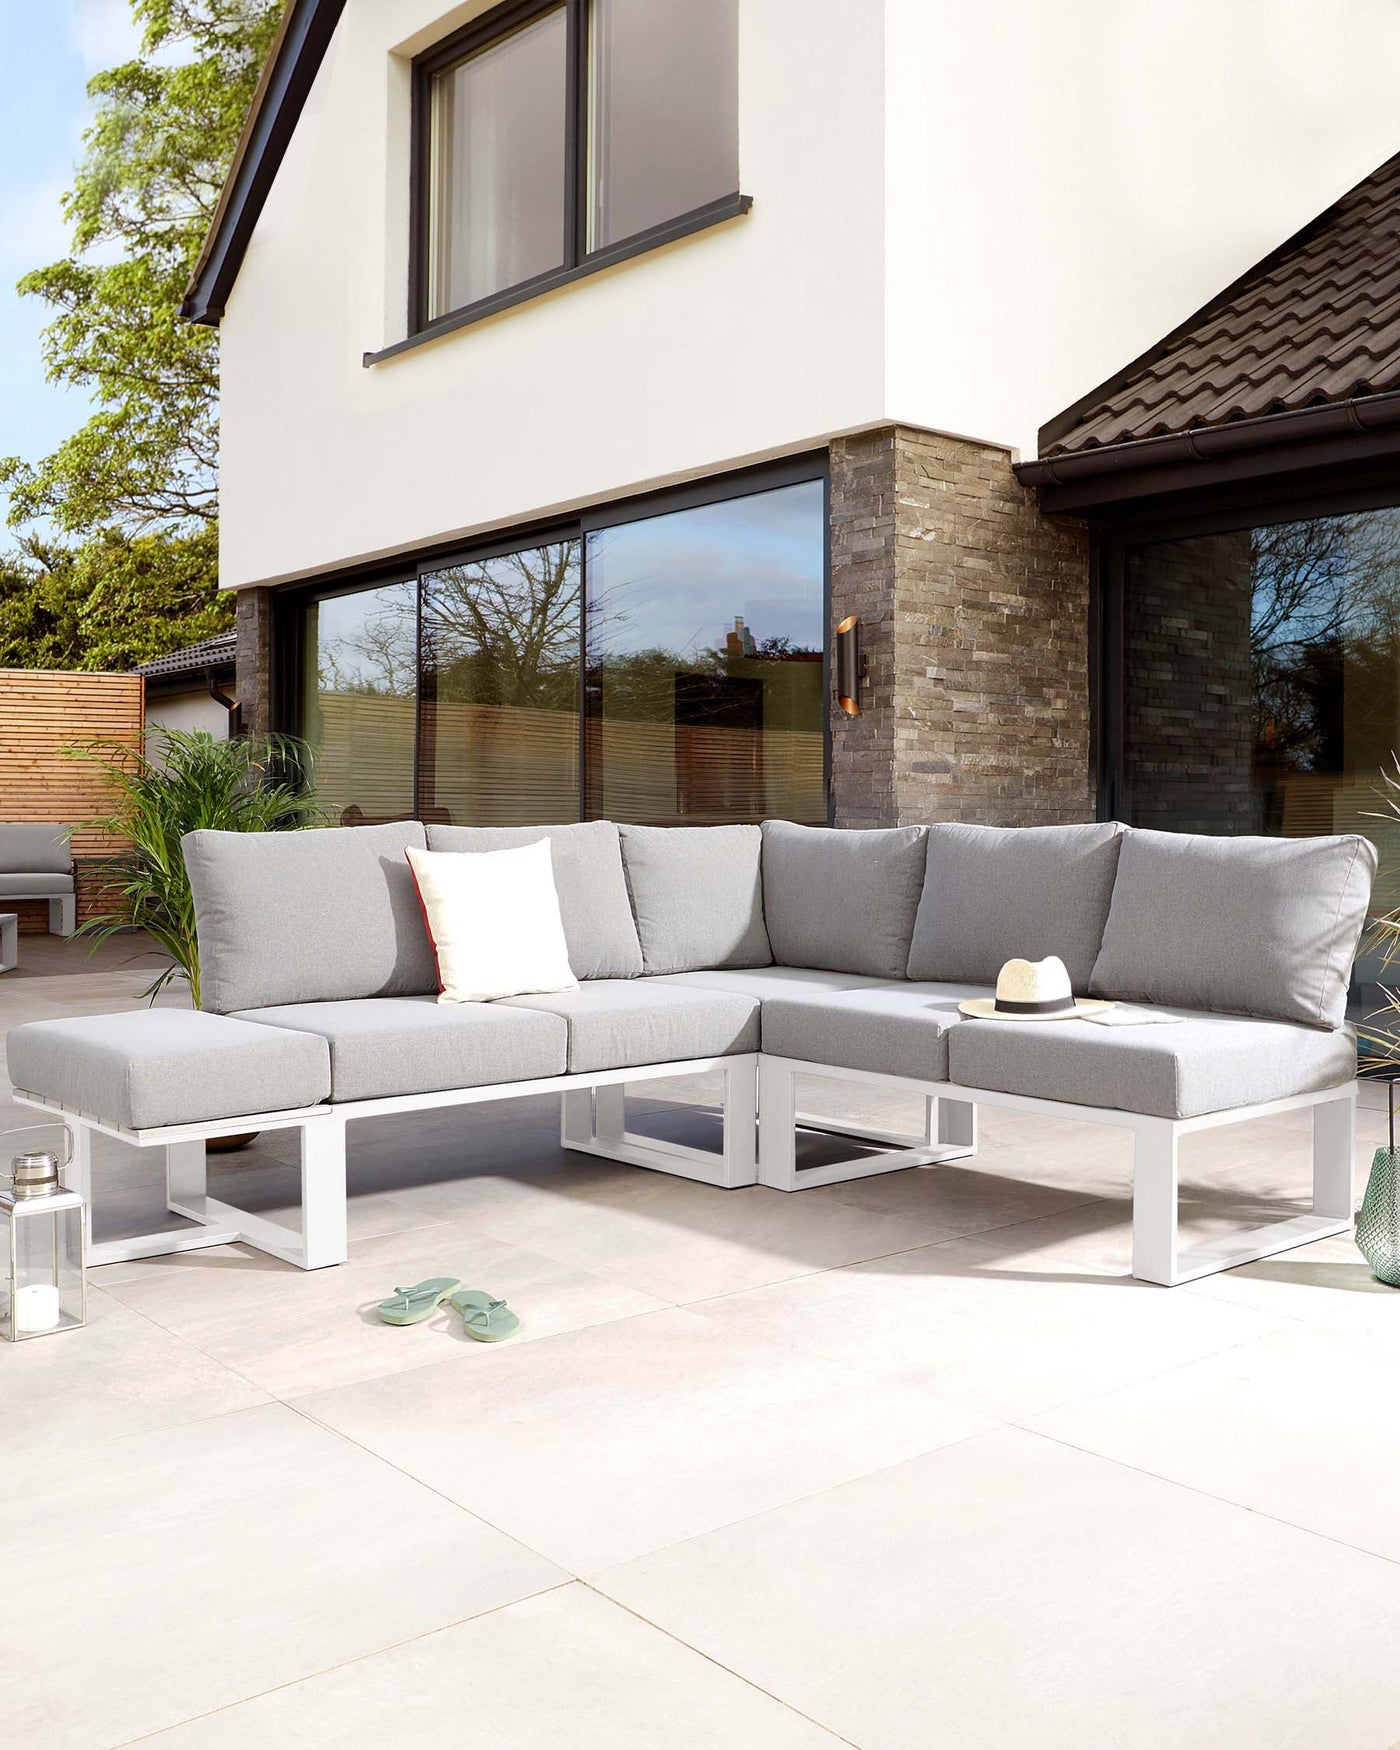 Outdoor sectional sofa with a sleek white metal frame and light grey cushions complemented by a square metal coffee table, set against a modern home backdrop.